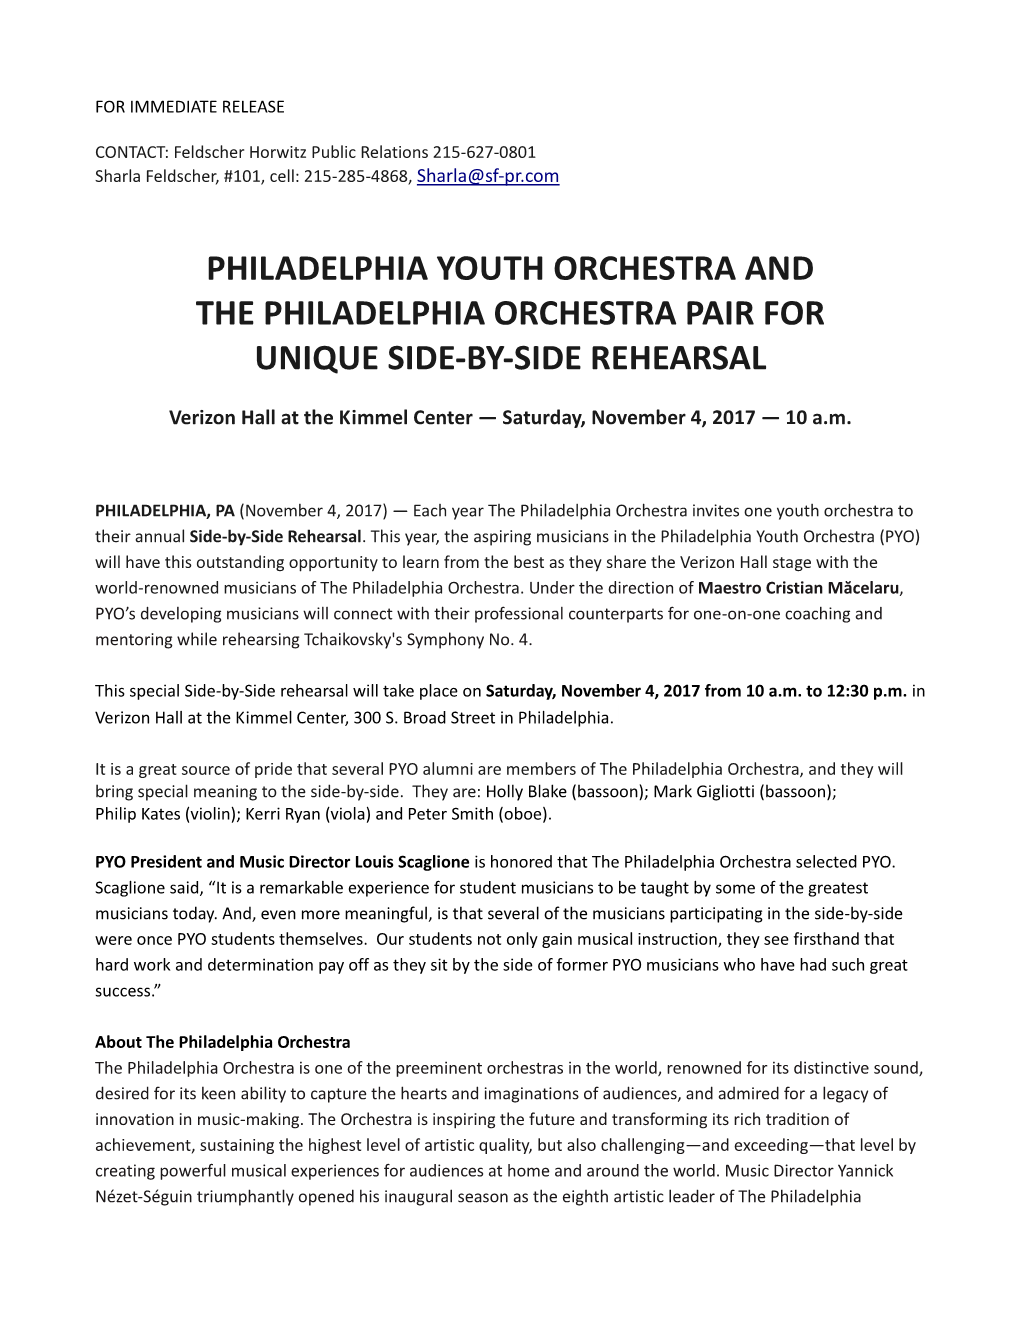 Philadelphia Youth Orchestra and the Philadelphia Orchestra Pair for Unique Side-By-Side Rehearsal